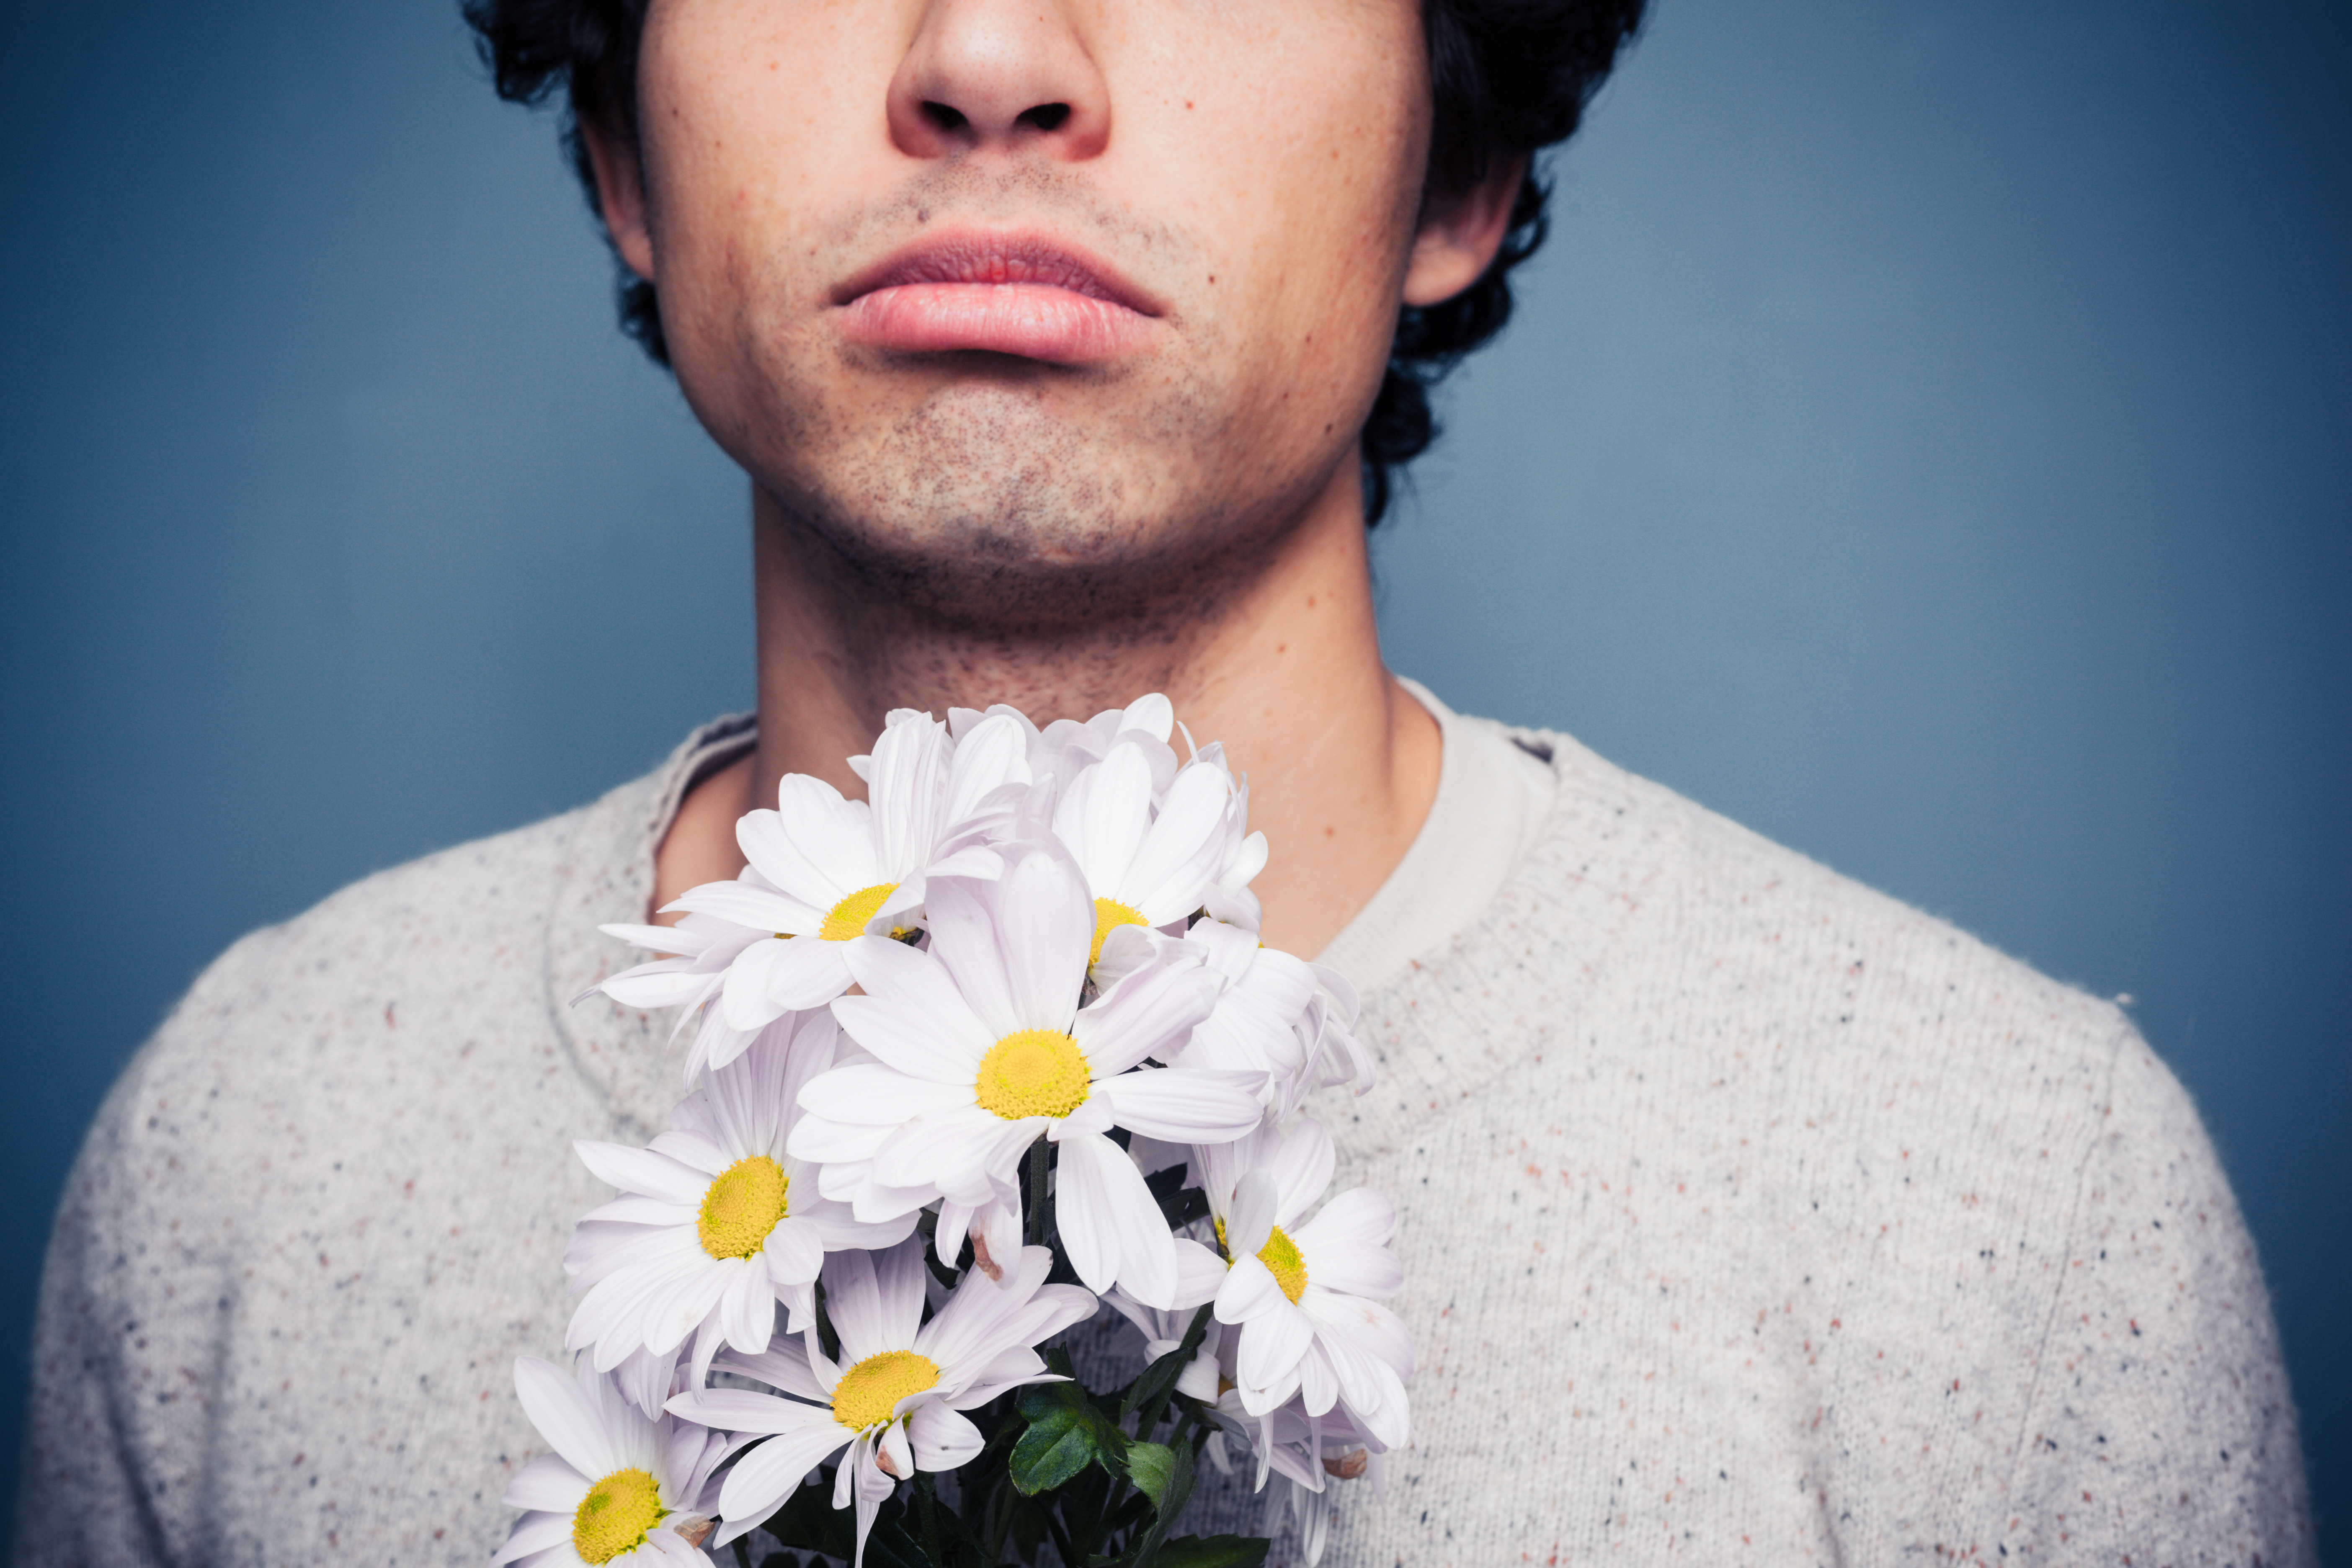 Man standing with flowers | Shutterstock